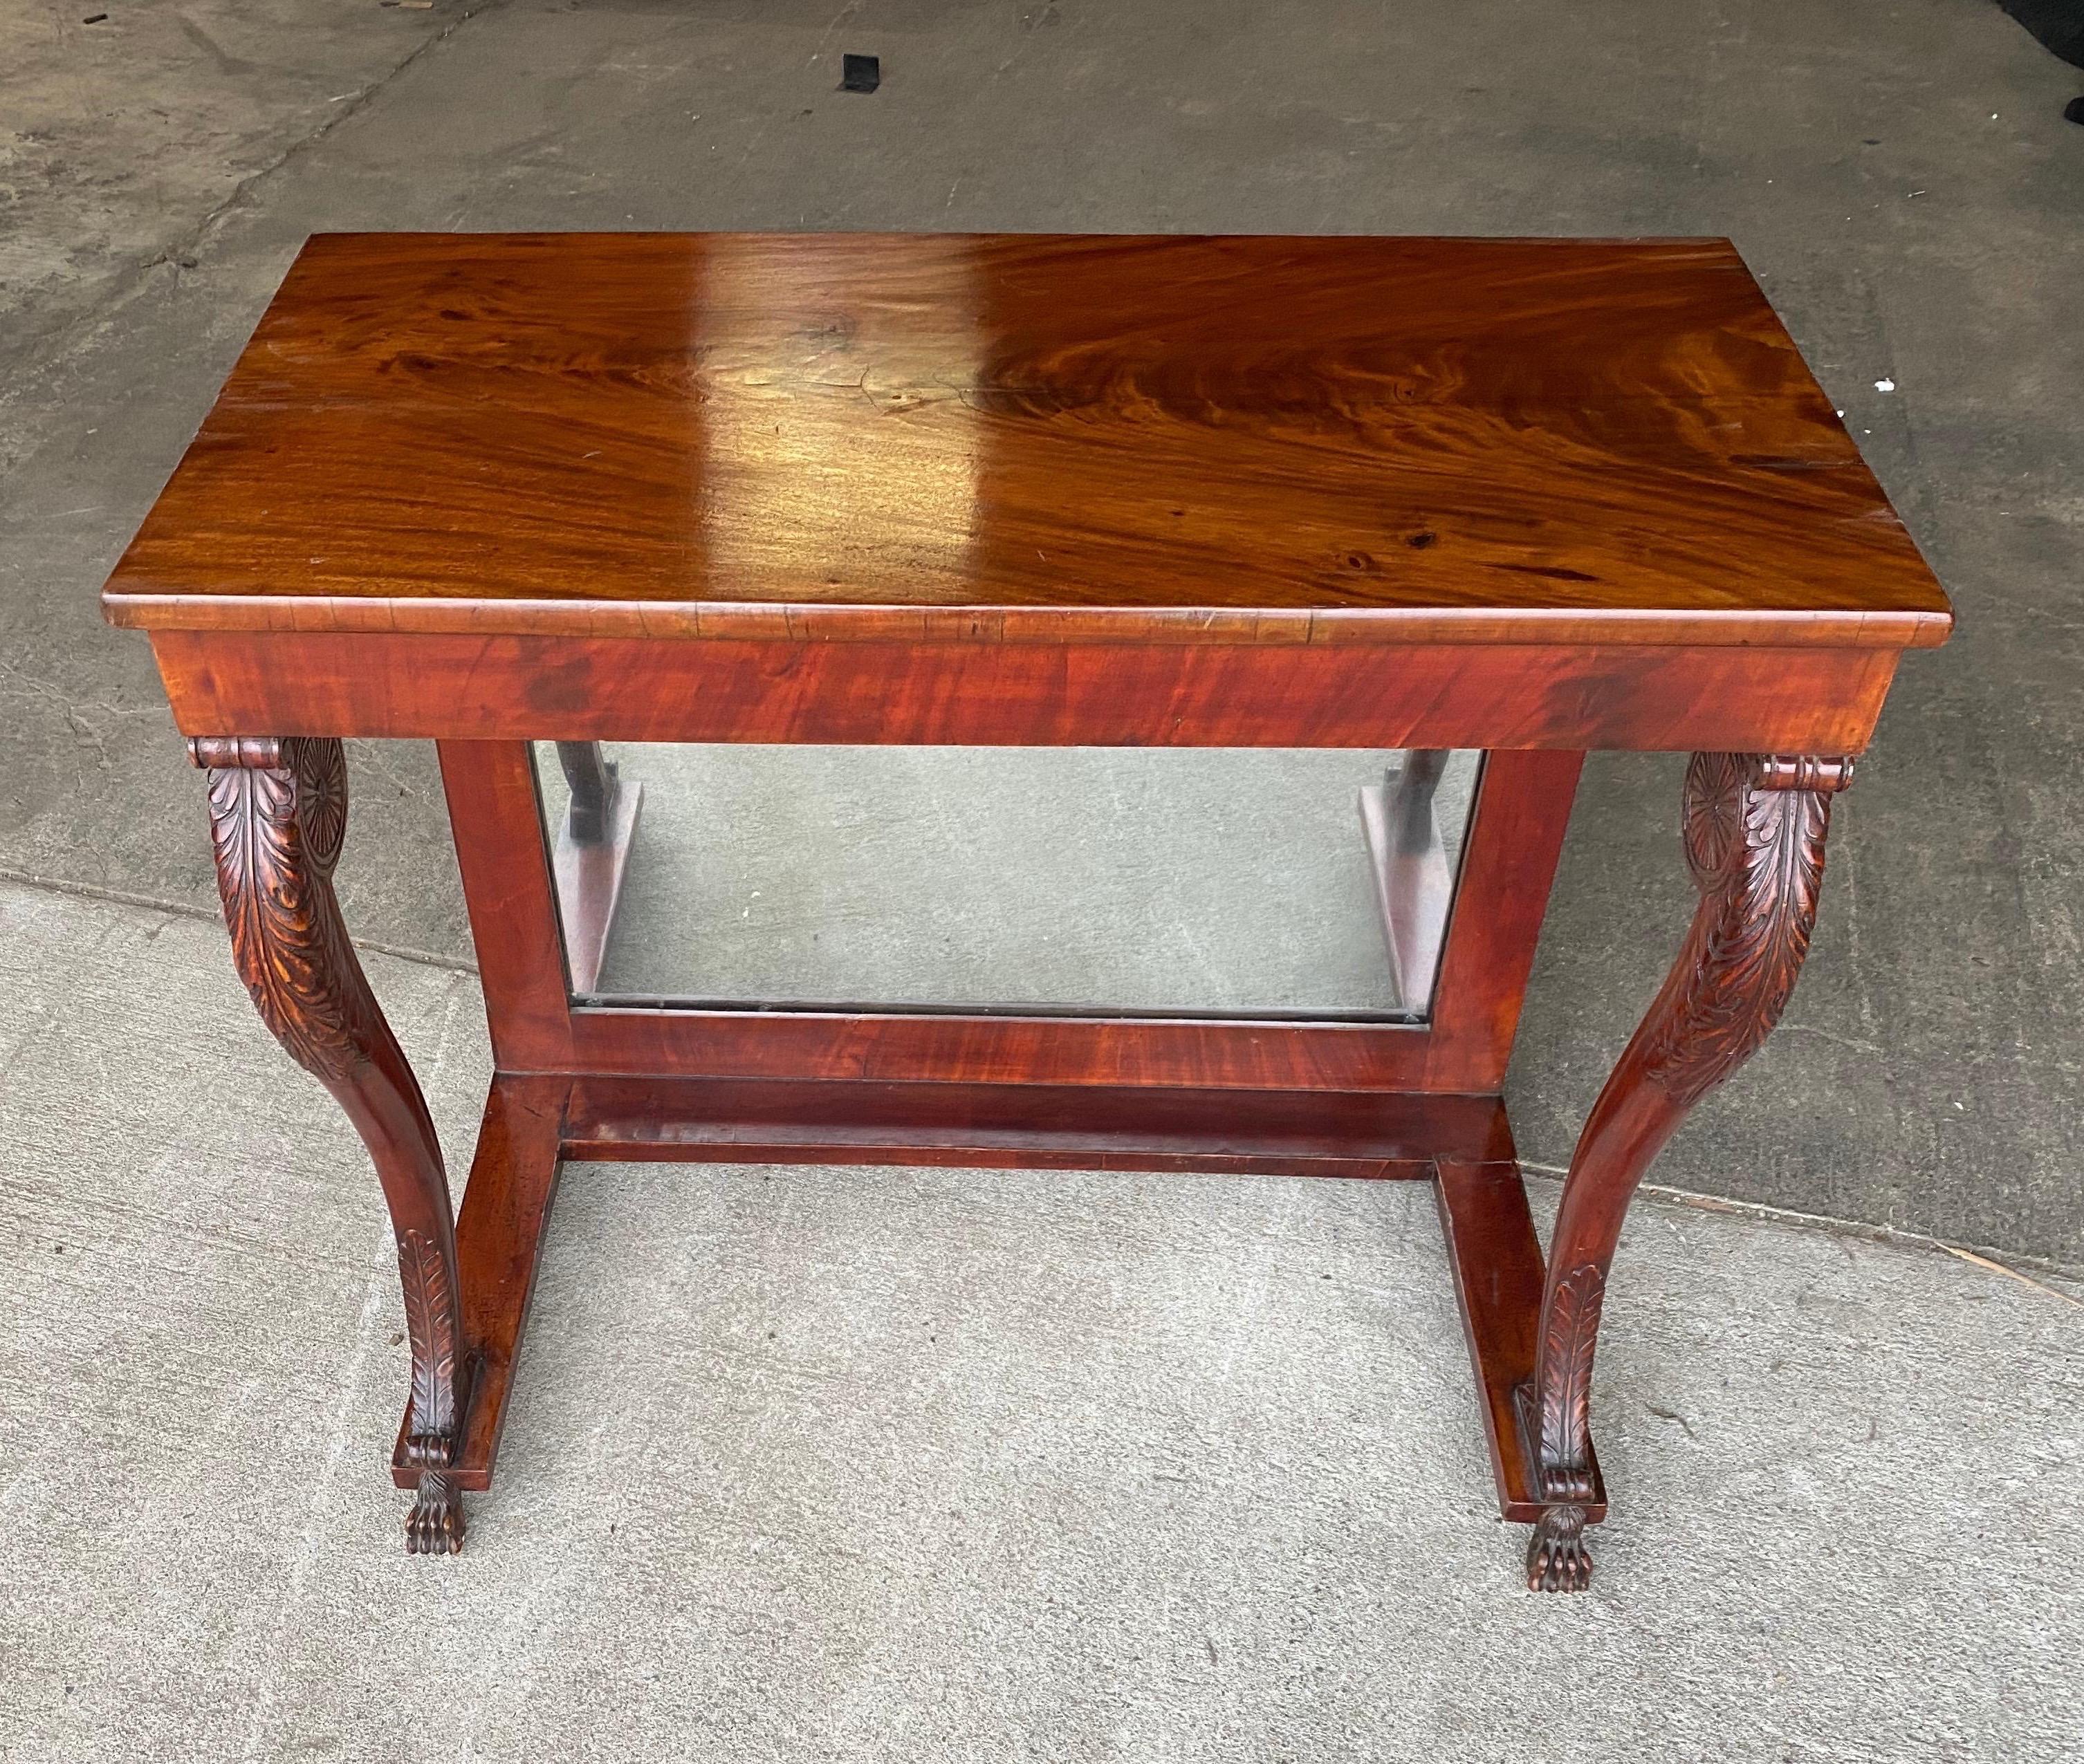 19th century English Regency mahogany console with paw feet and mirrored back. Highly figured mahogany top, carved knees and legs with acanthus leaves and terminating in paw feet.